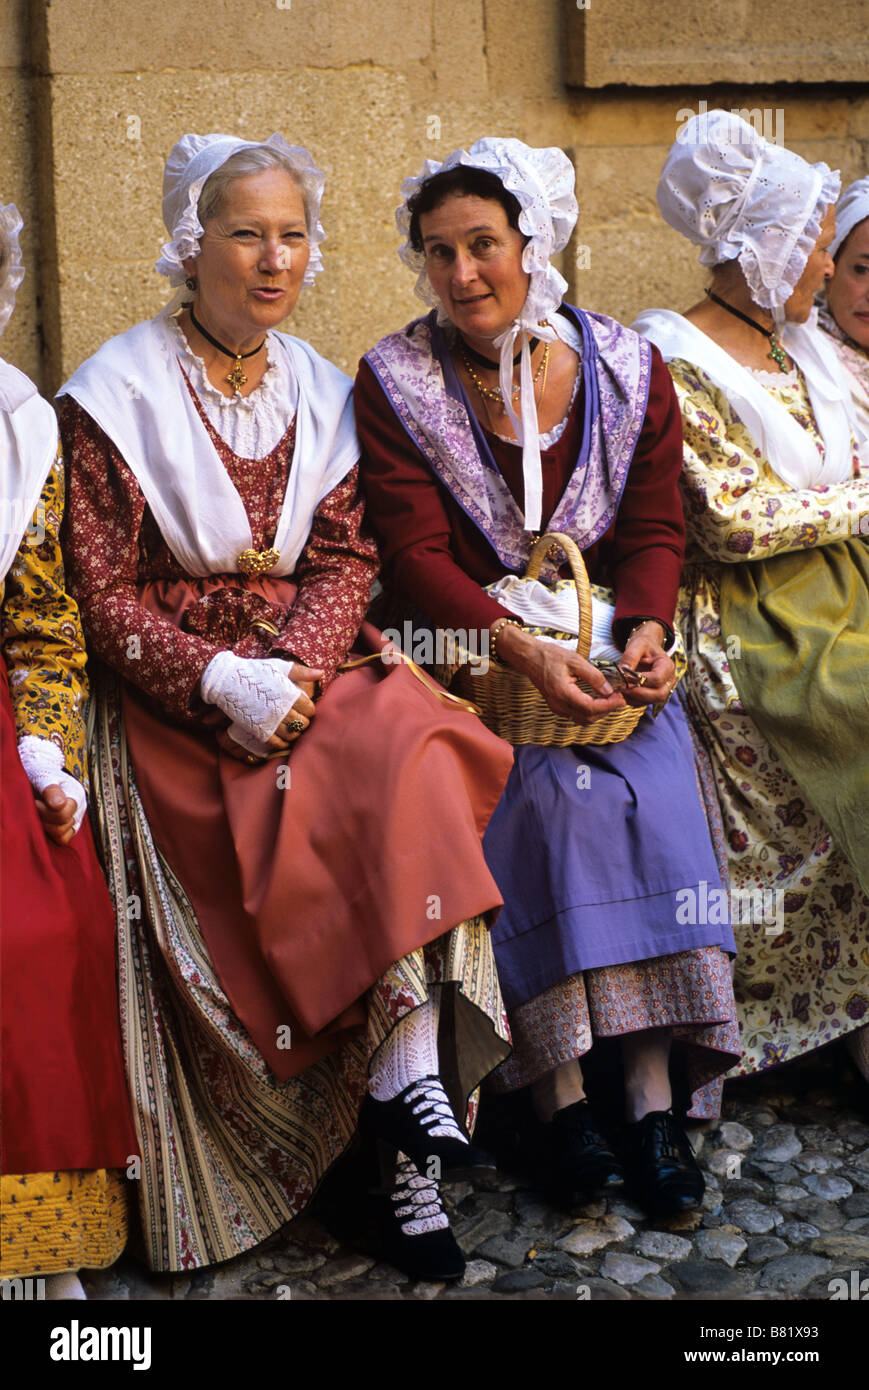 Provencal Women in Traditional Folklore Costume, Calisson festival, Aix-en- Provence or Aix en Provence, France Stock Photo - Alamy